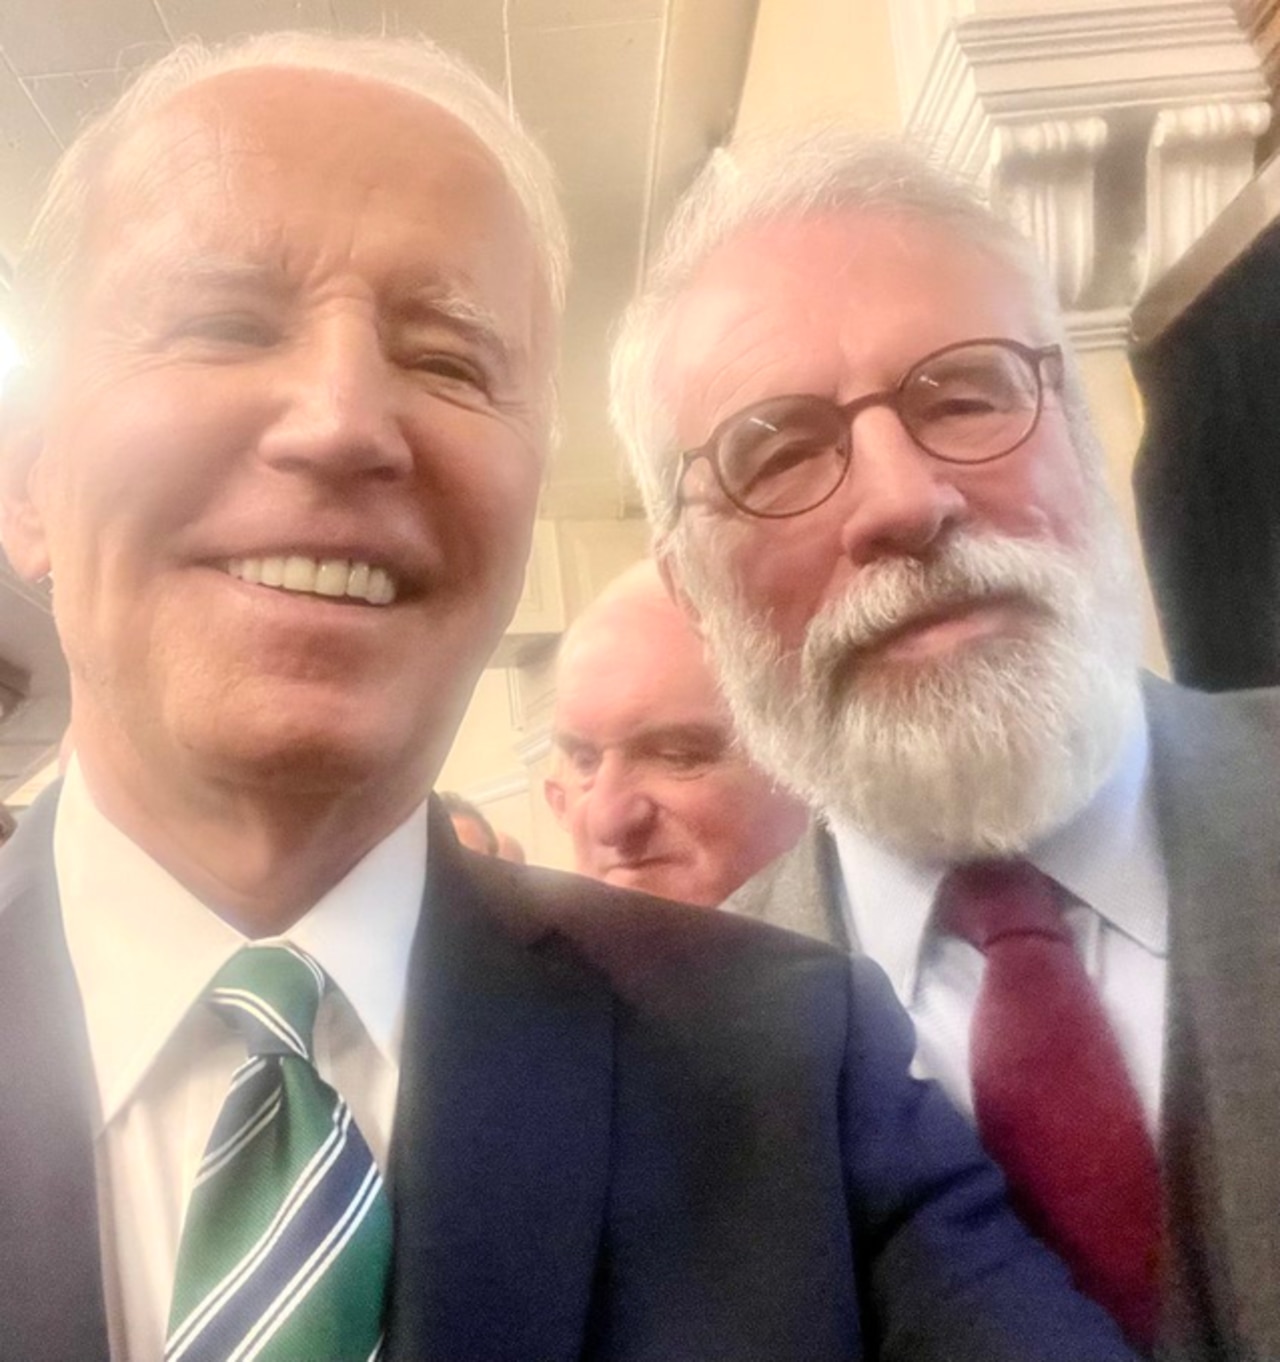 Us President Courts Troubles With Gerry Adams Selfie The Australian